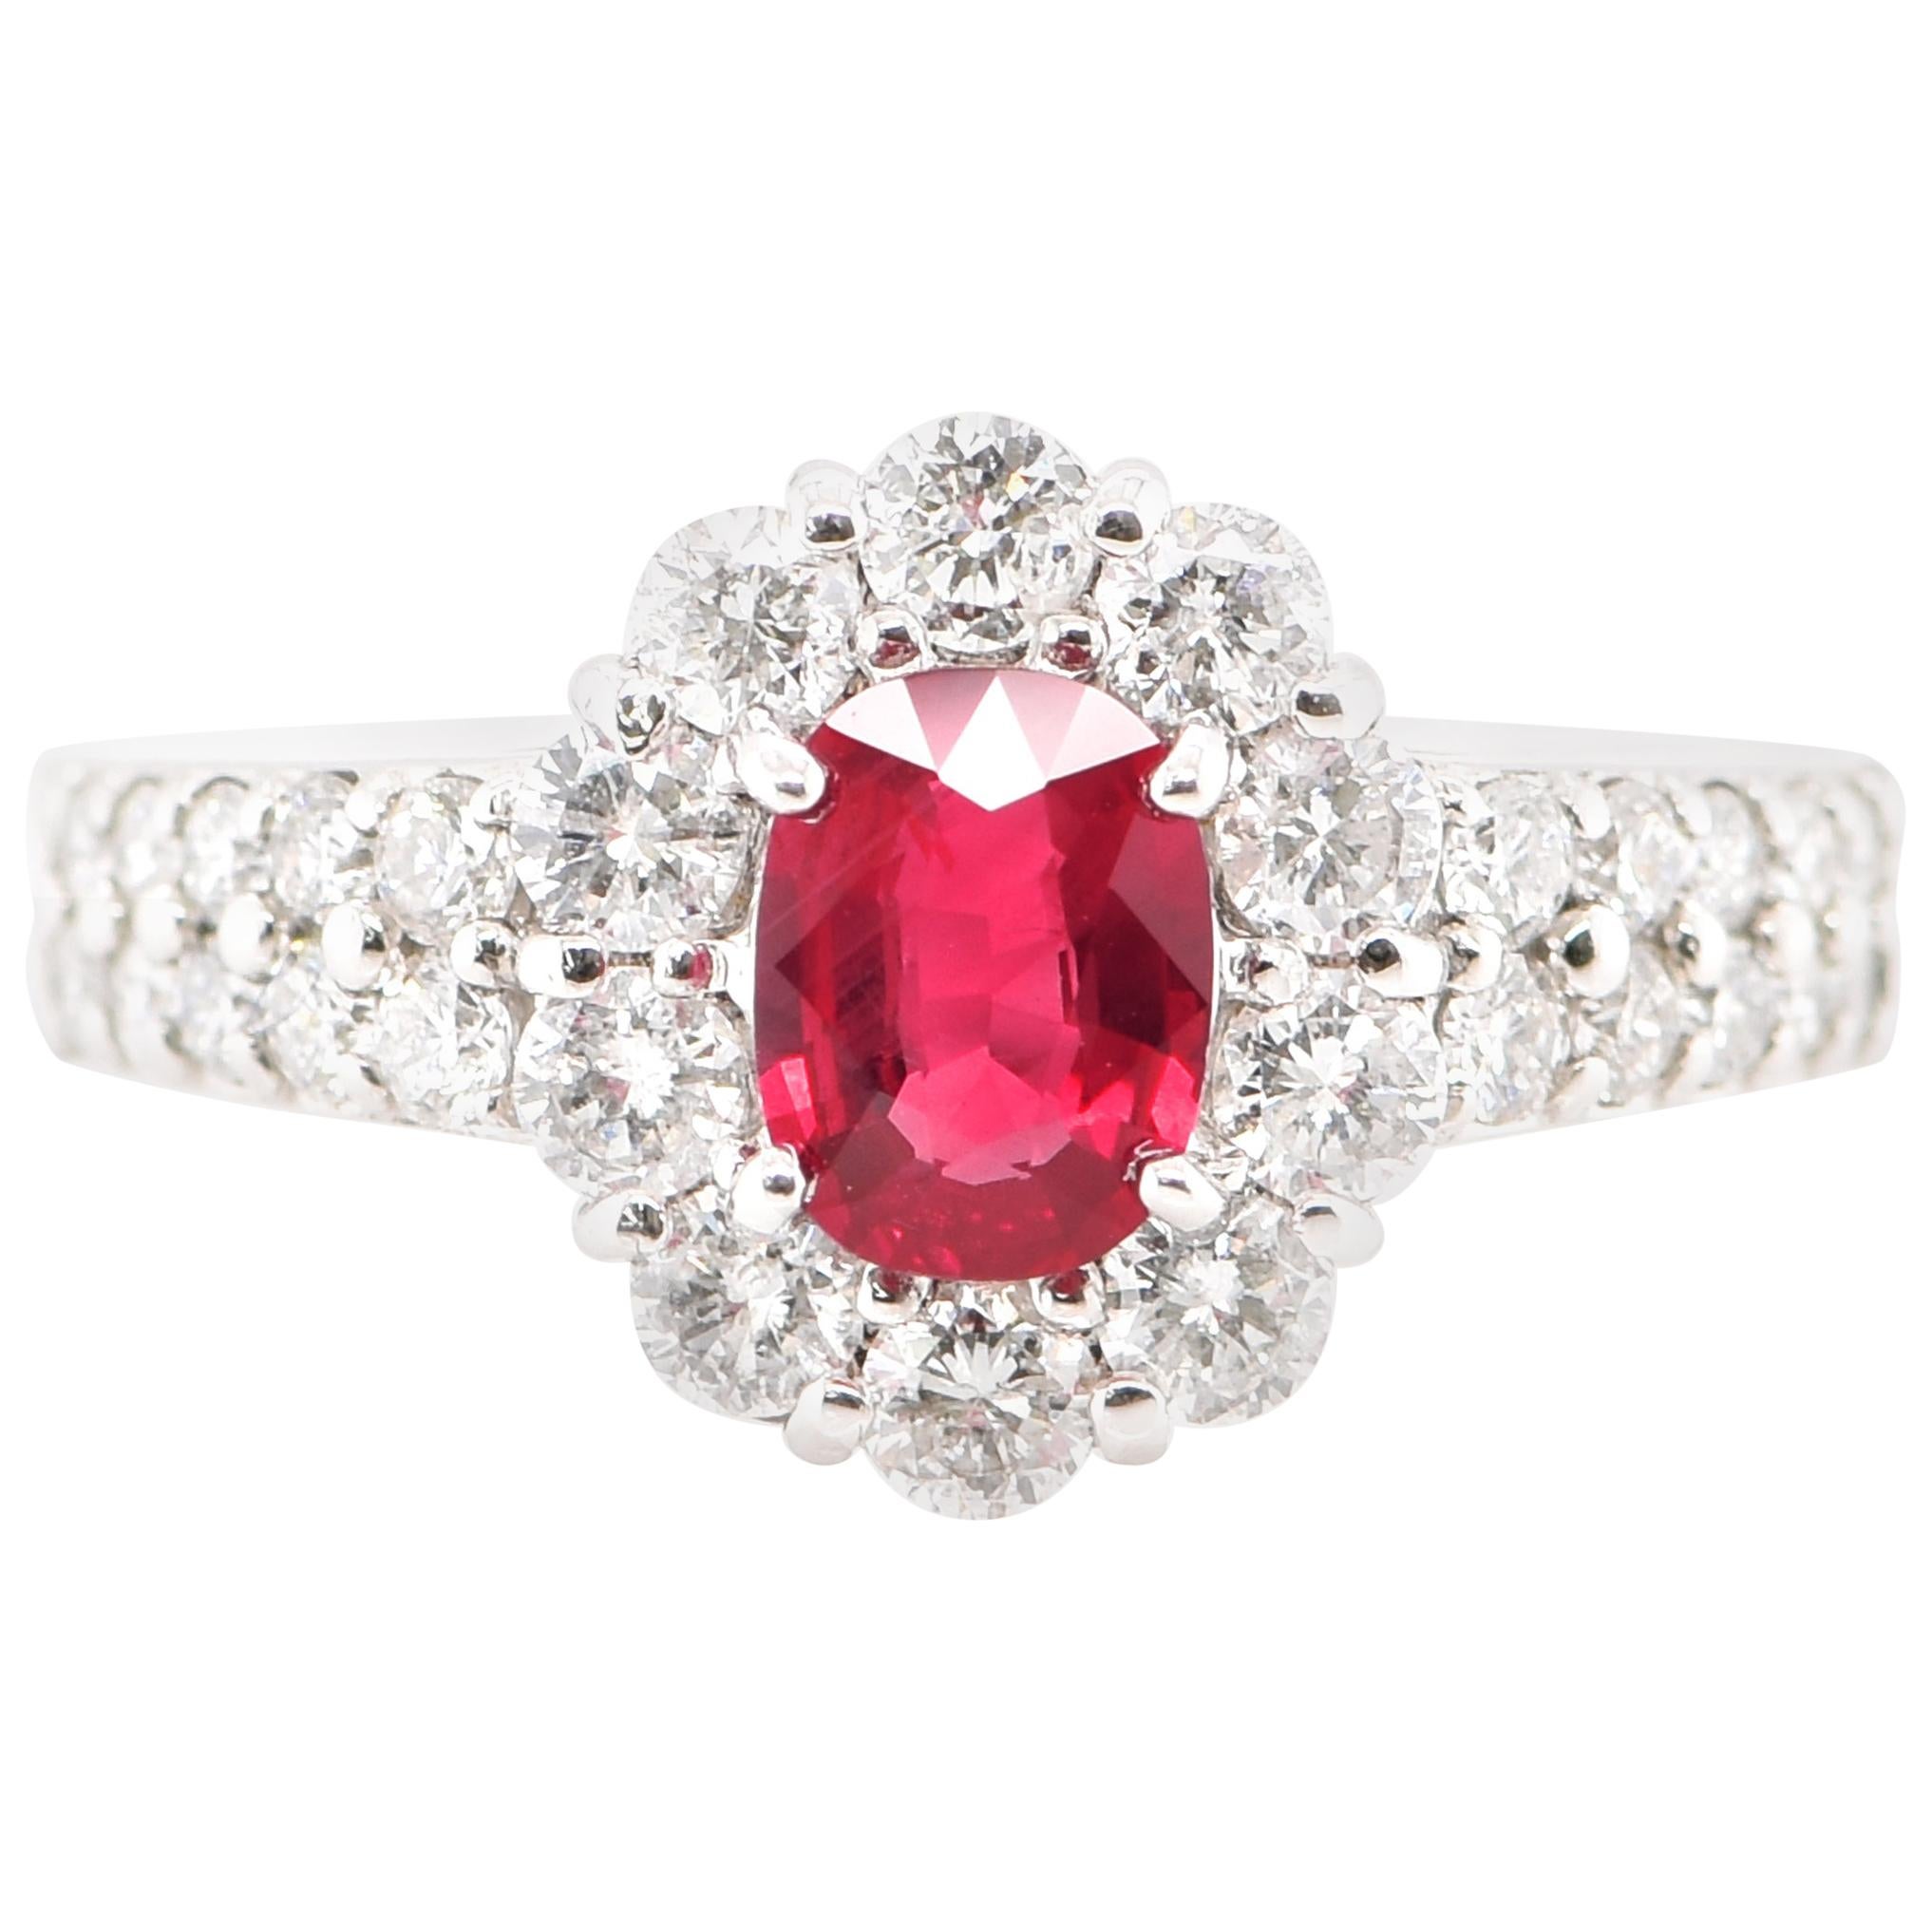 0.81 Carat Natural Ruby and Diamond Halo Ring Set in Platinum